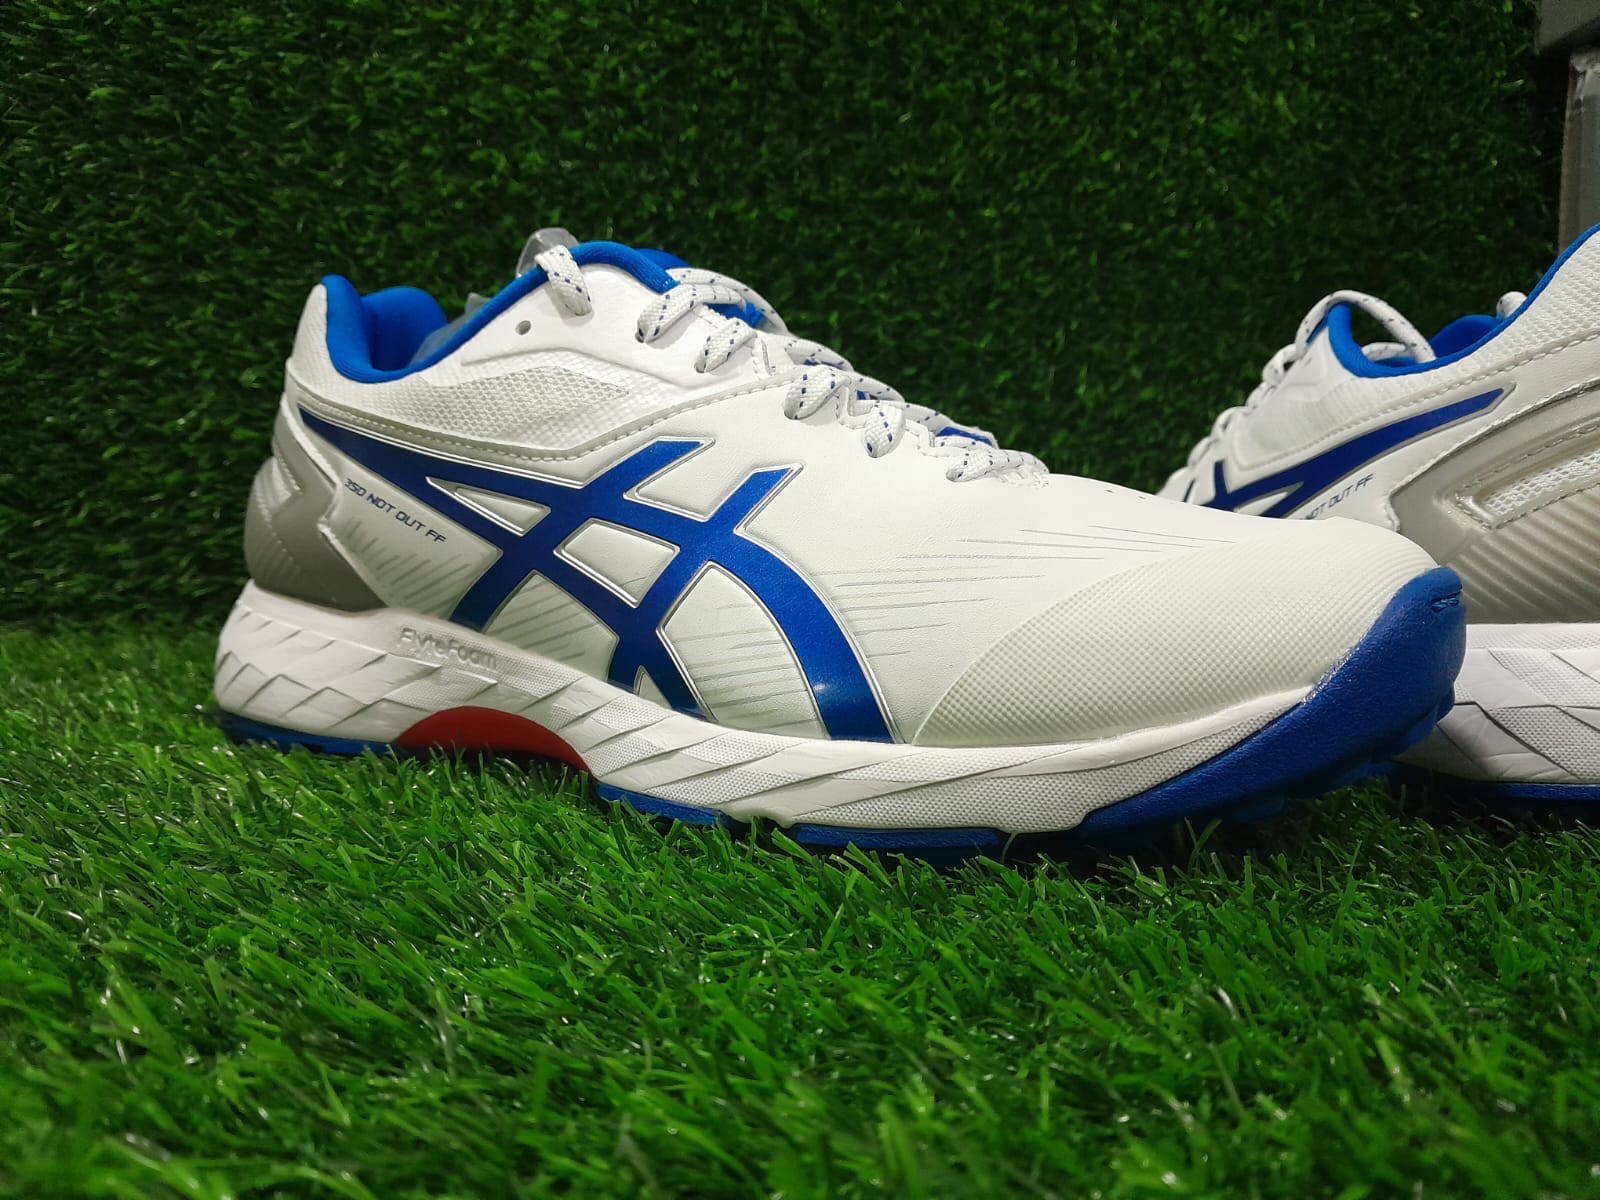 Asics 350 Not Out FF Leather Full Spike Cricket Shoes White Tuna Blue